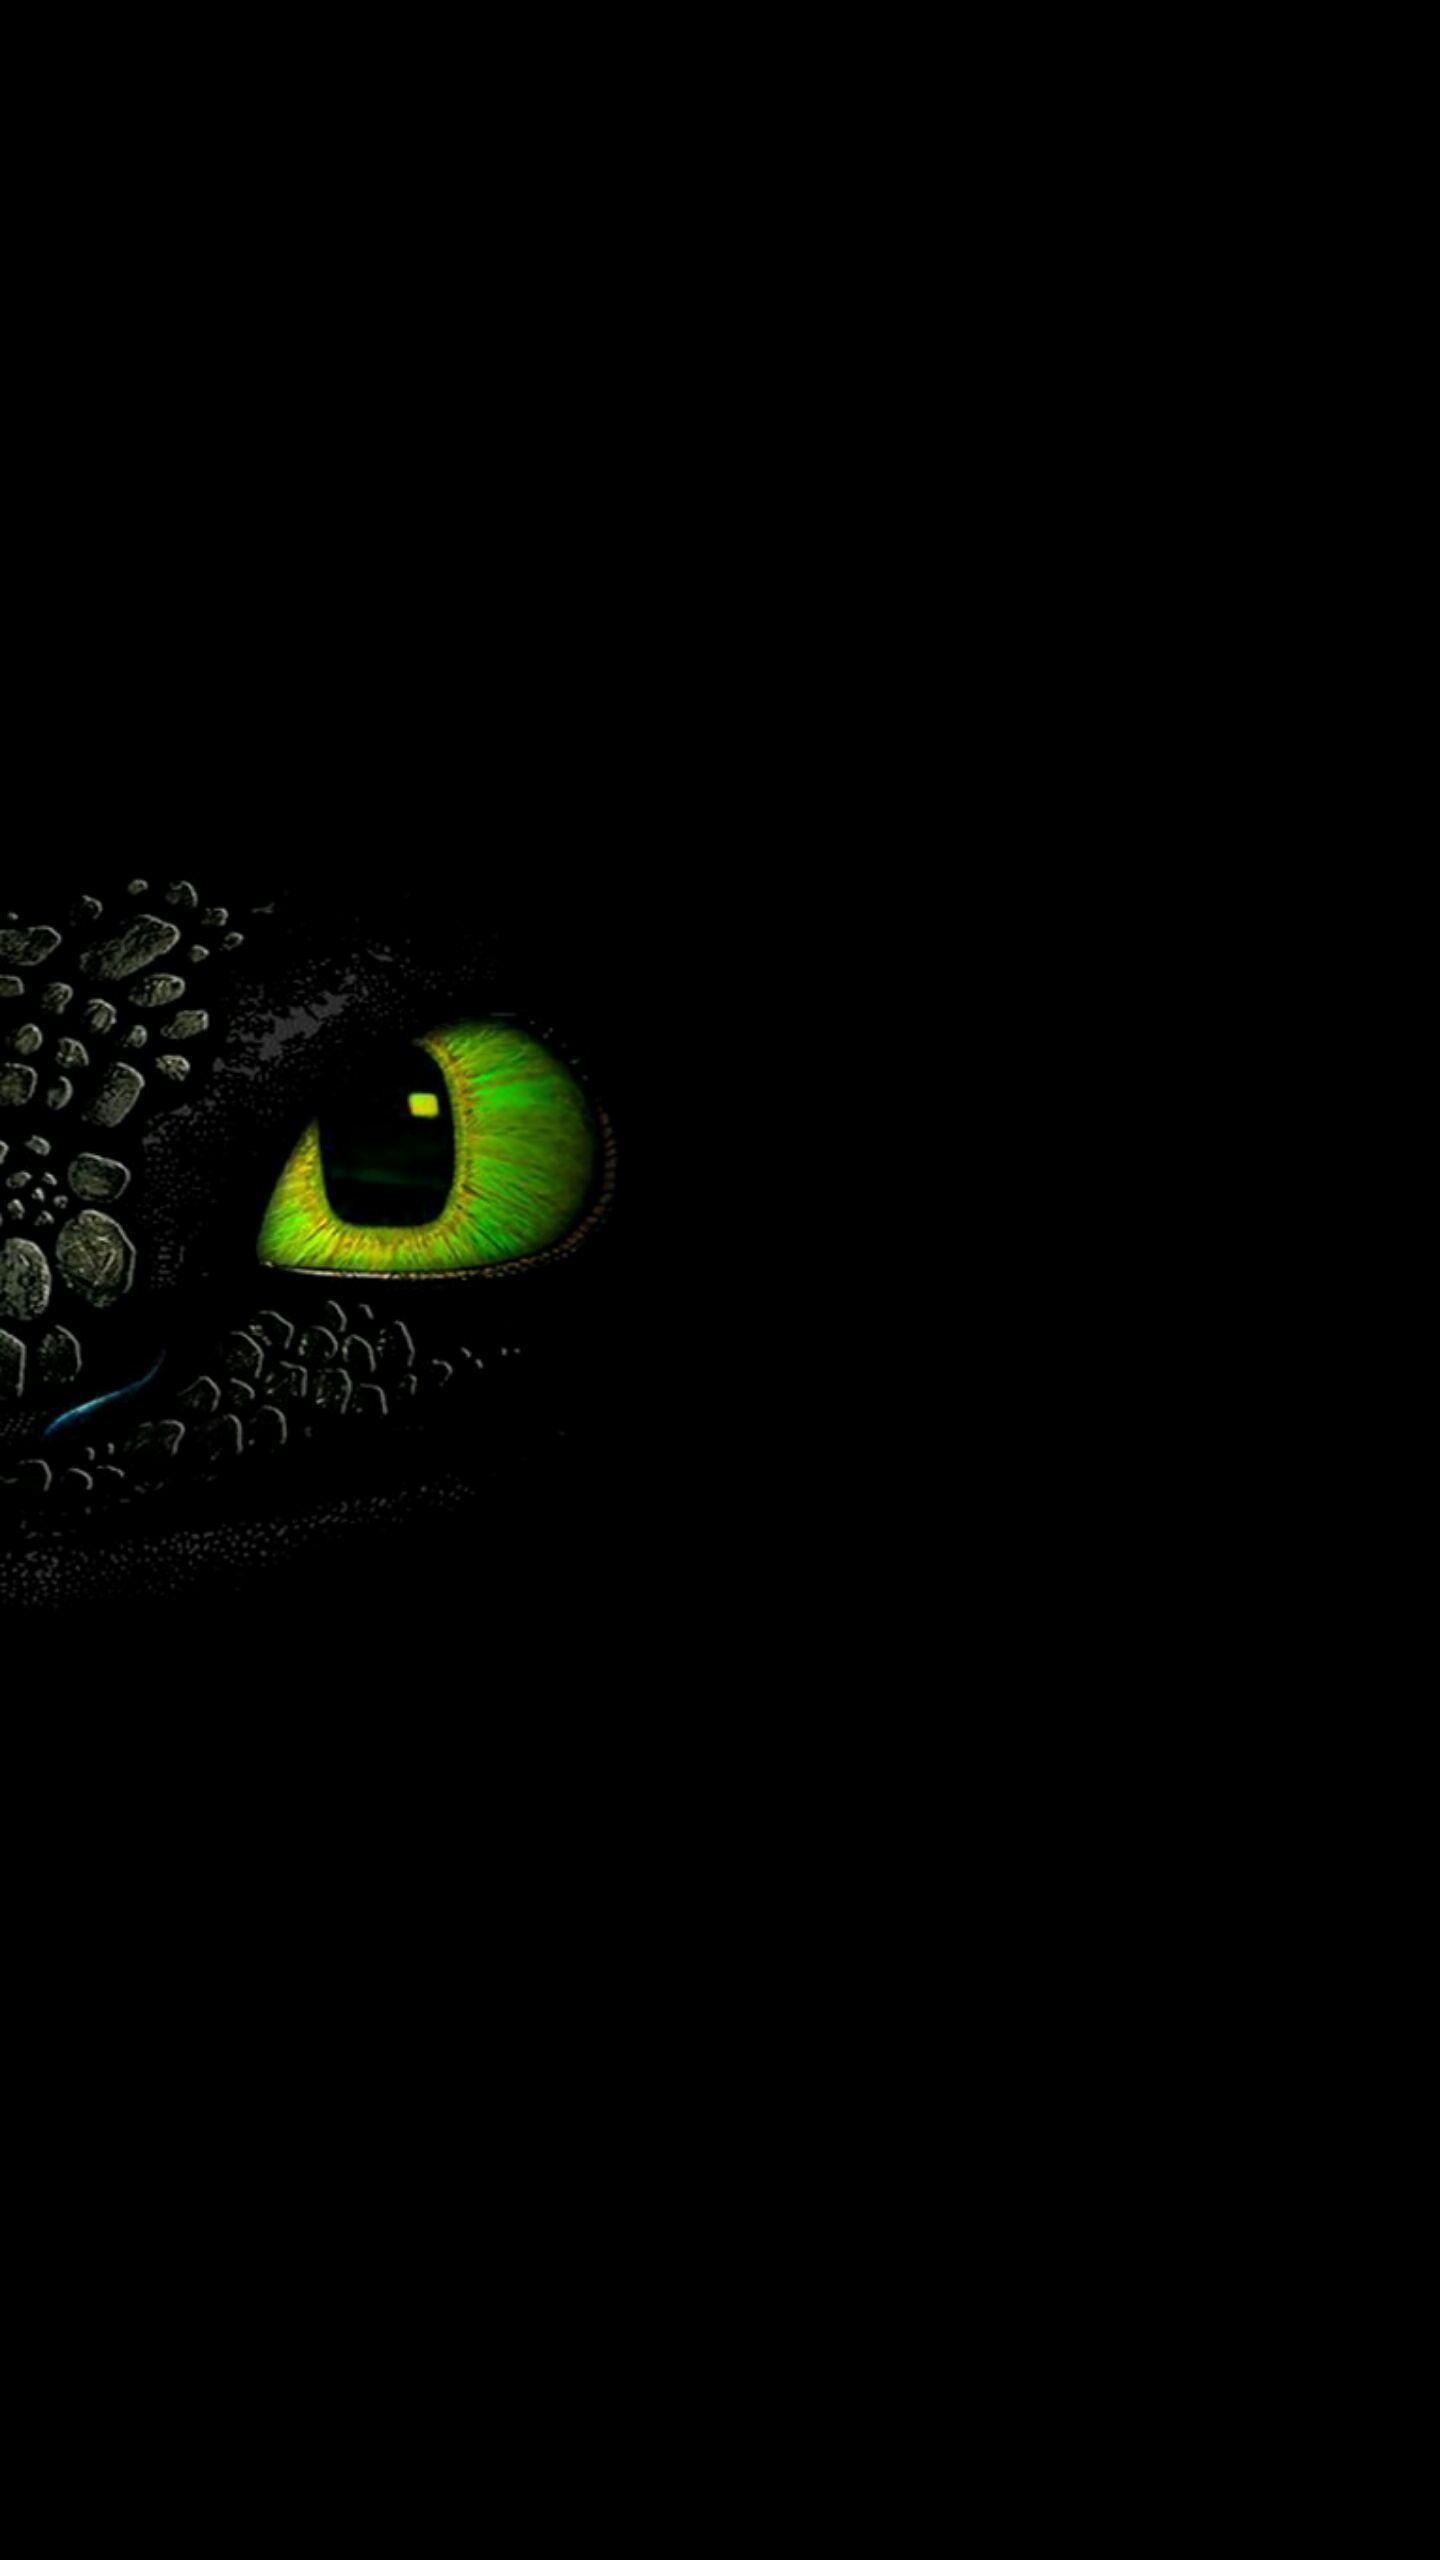 toothless mobile wallpaper HD Archives Wallpaper Ideas. Nice